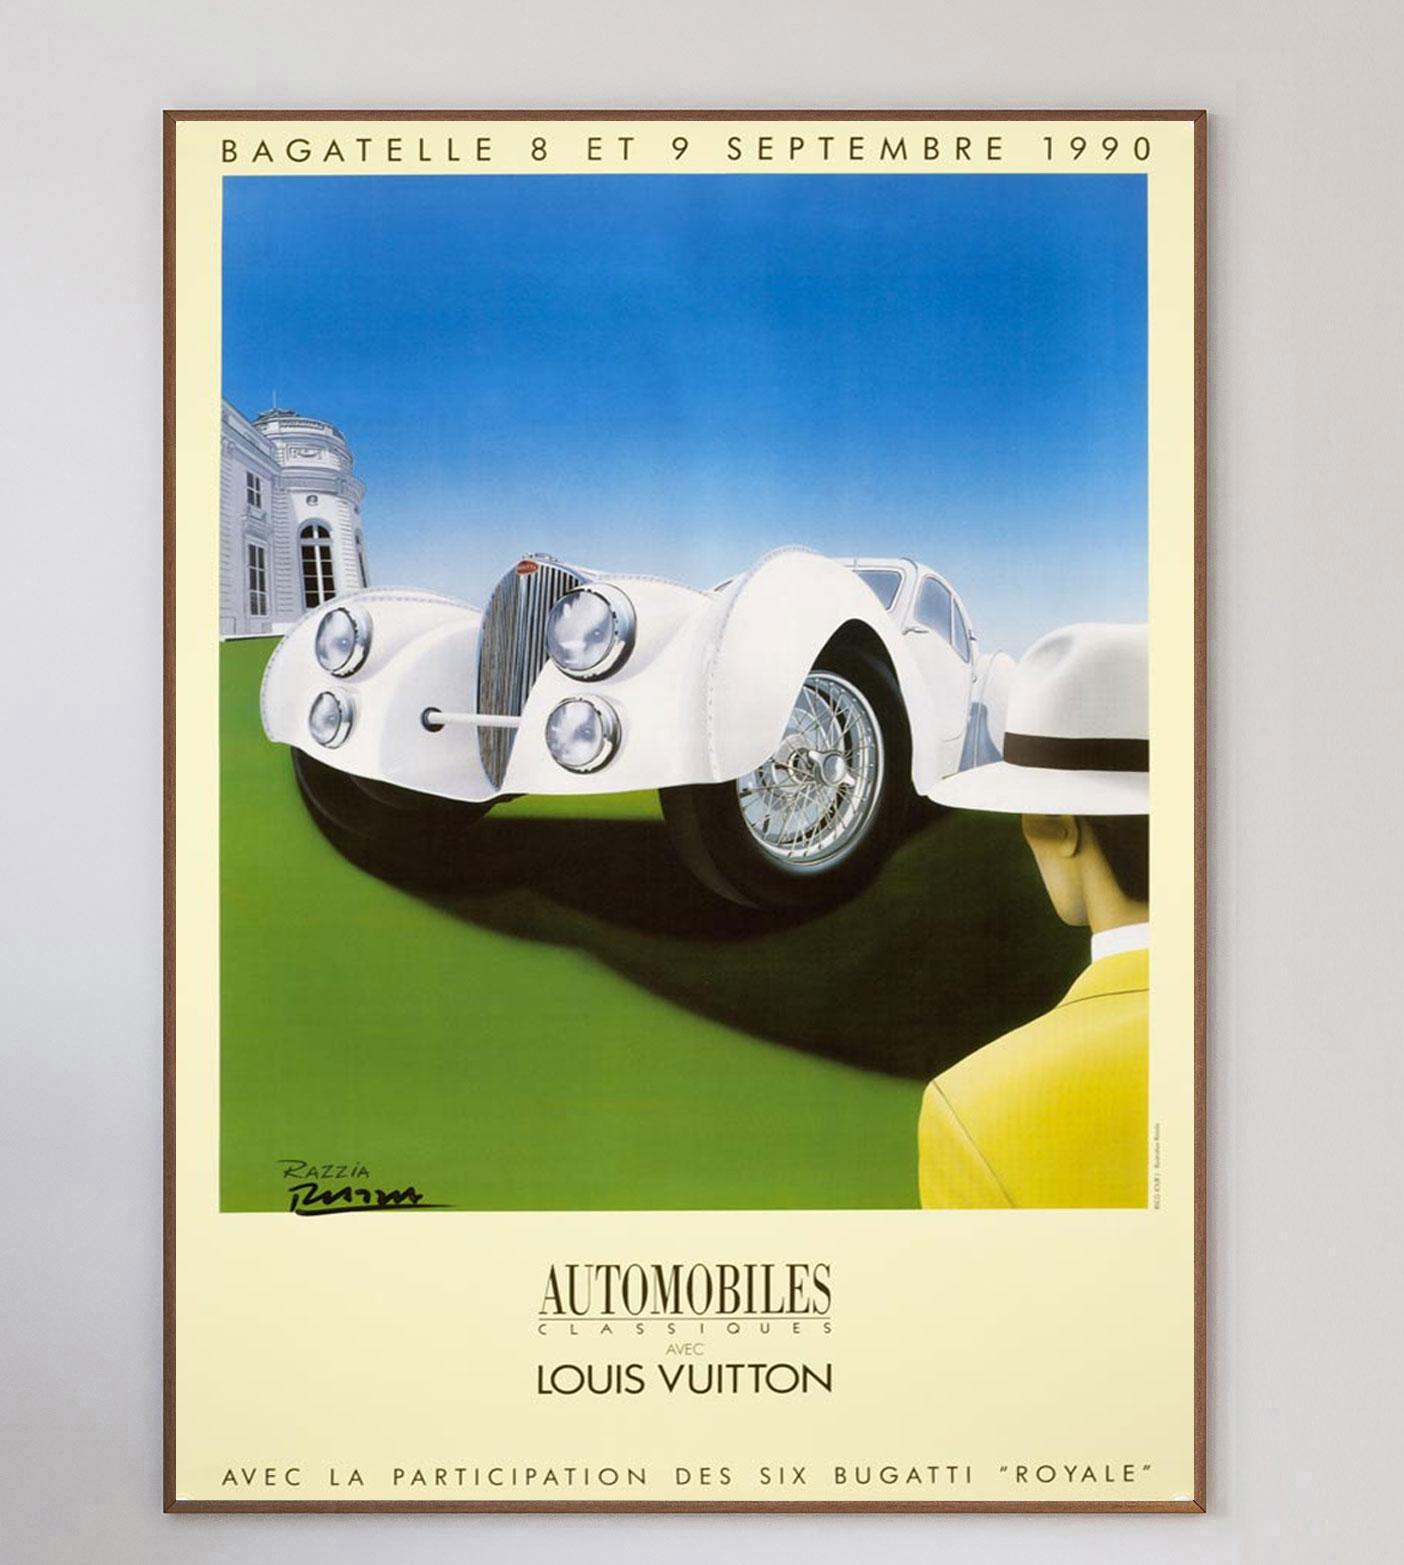 The Louis Vuitton Bagatelle Concours d'Elegance is an annual event held in the Parc de Bagatelle in Paris, France beginning in 1988. In 1990, the Bugatti Royales were featured and this image shows the Bugatti T57 Atlantic.

Beautifully illustrated